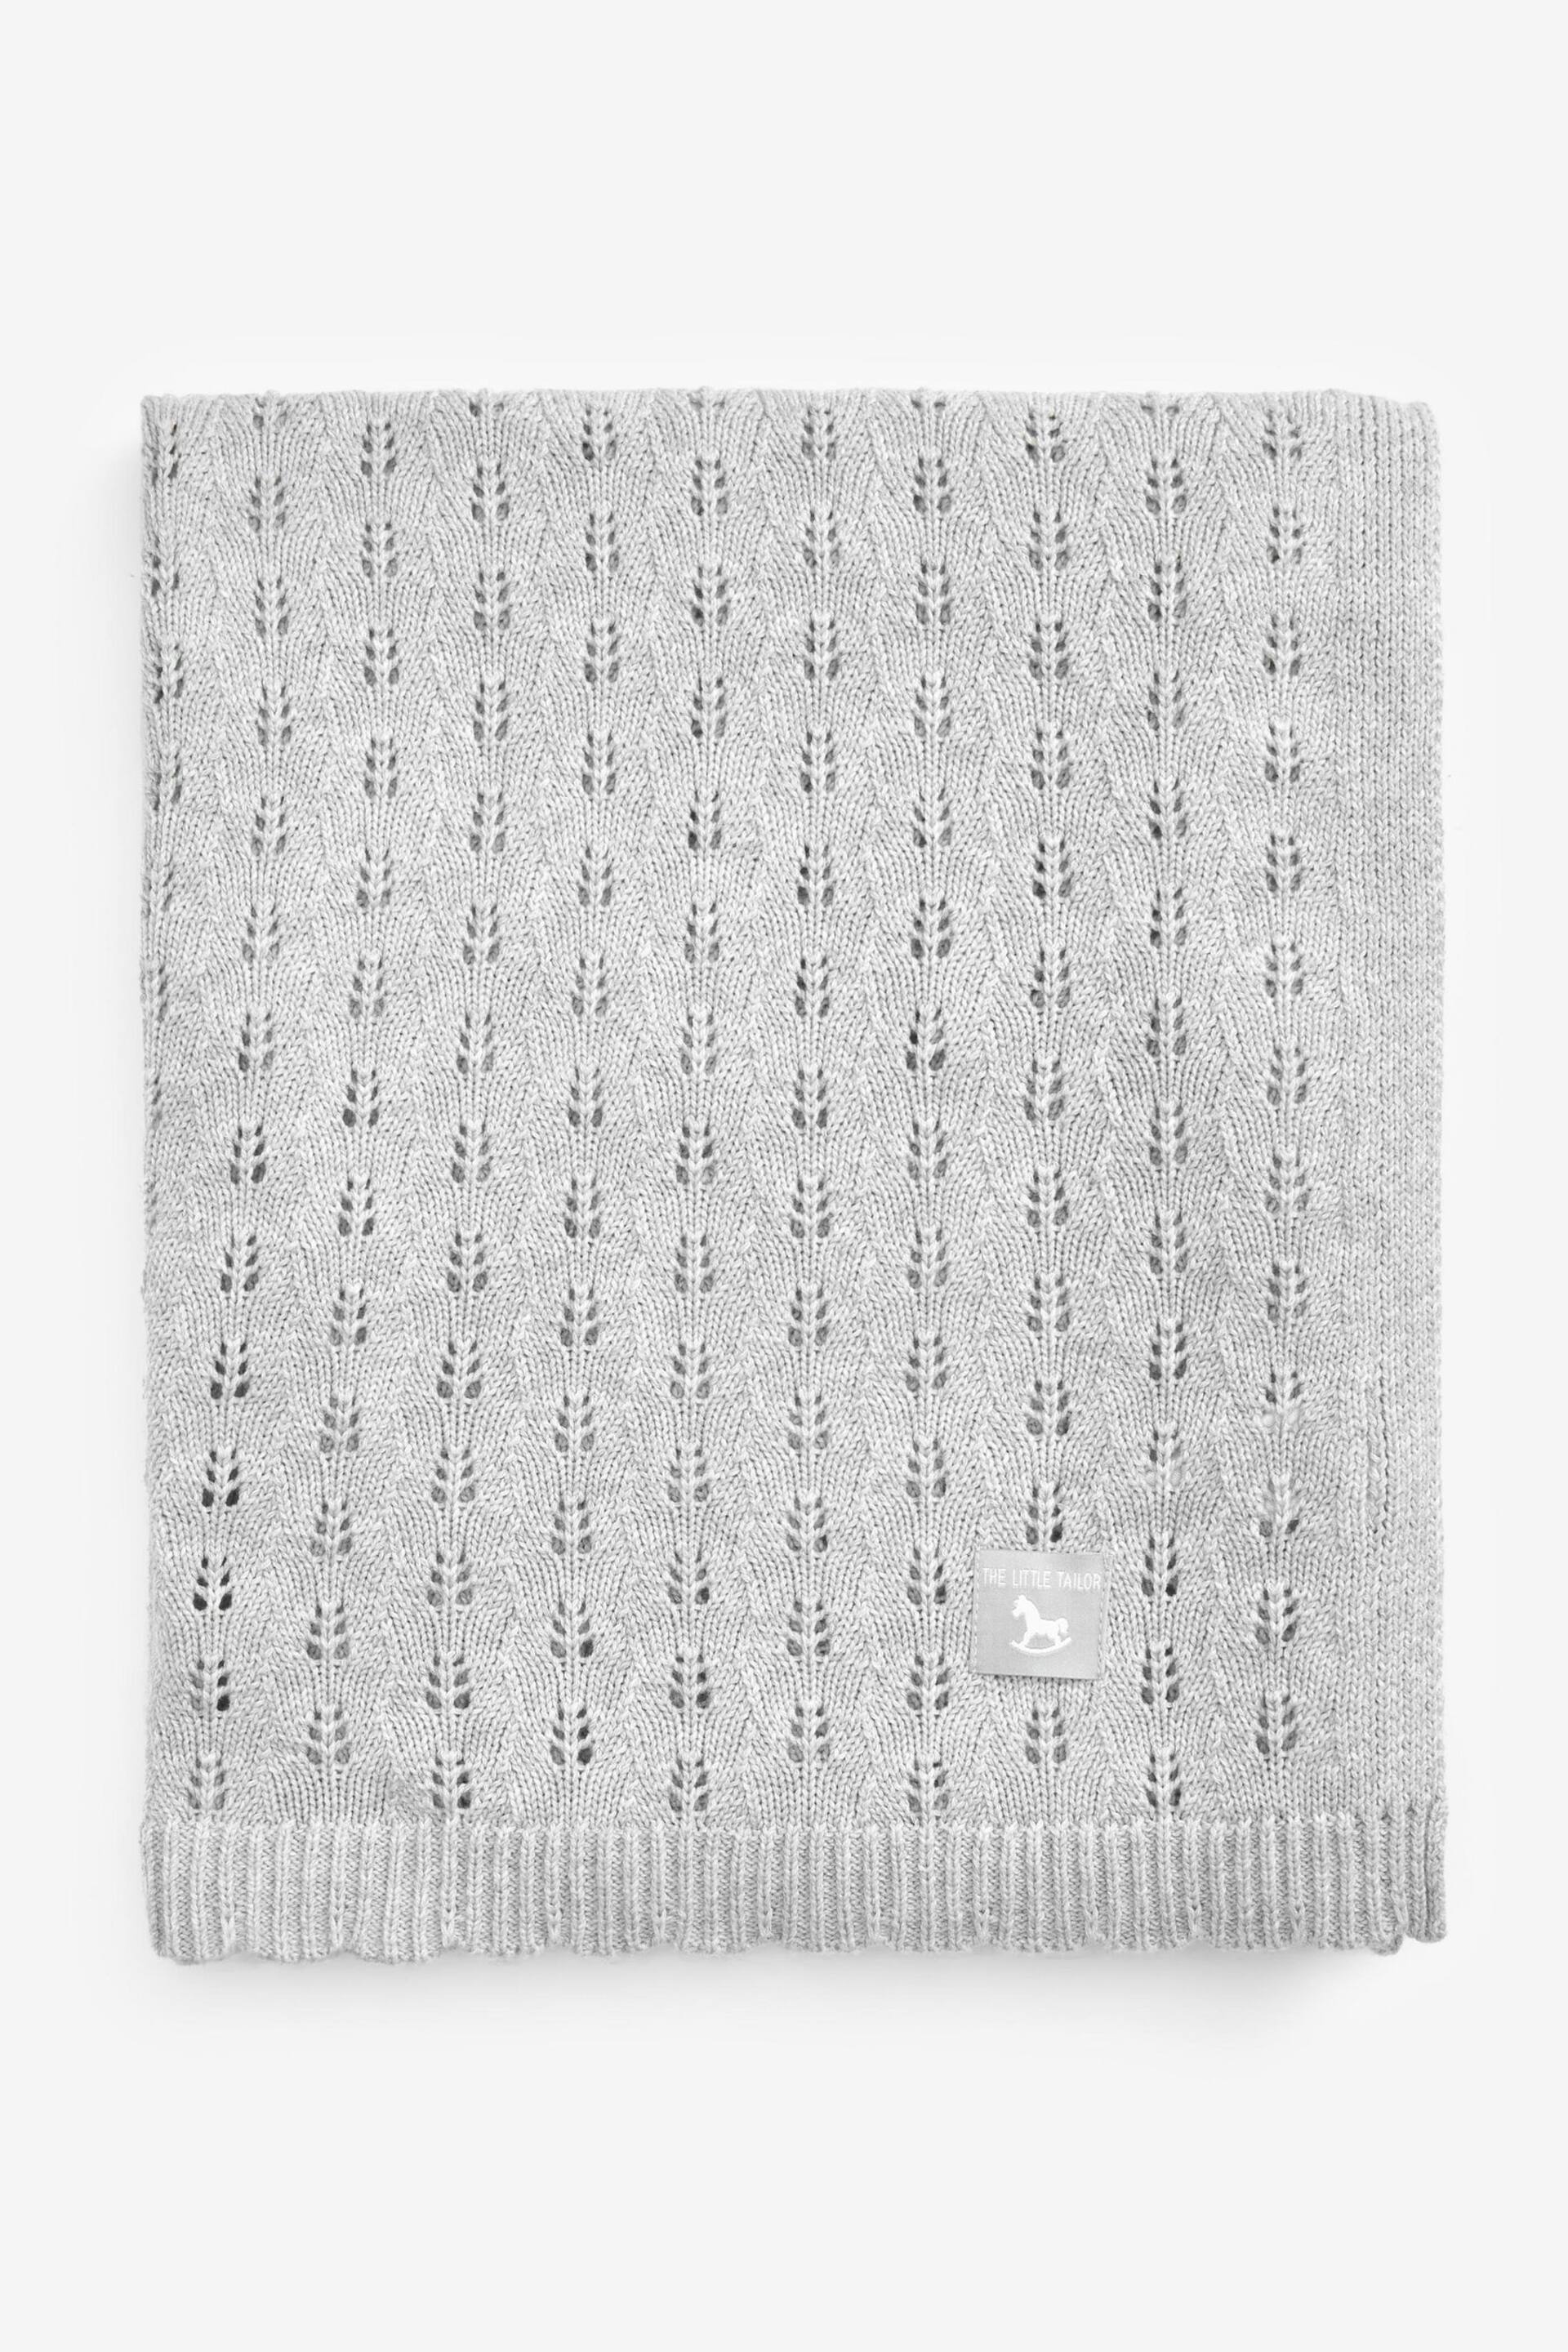 The Little Tailor Cotton Pointelle Baby Blanket - Image 2 of 4